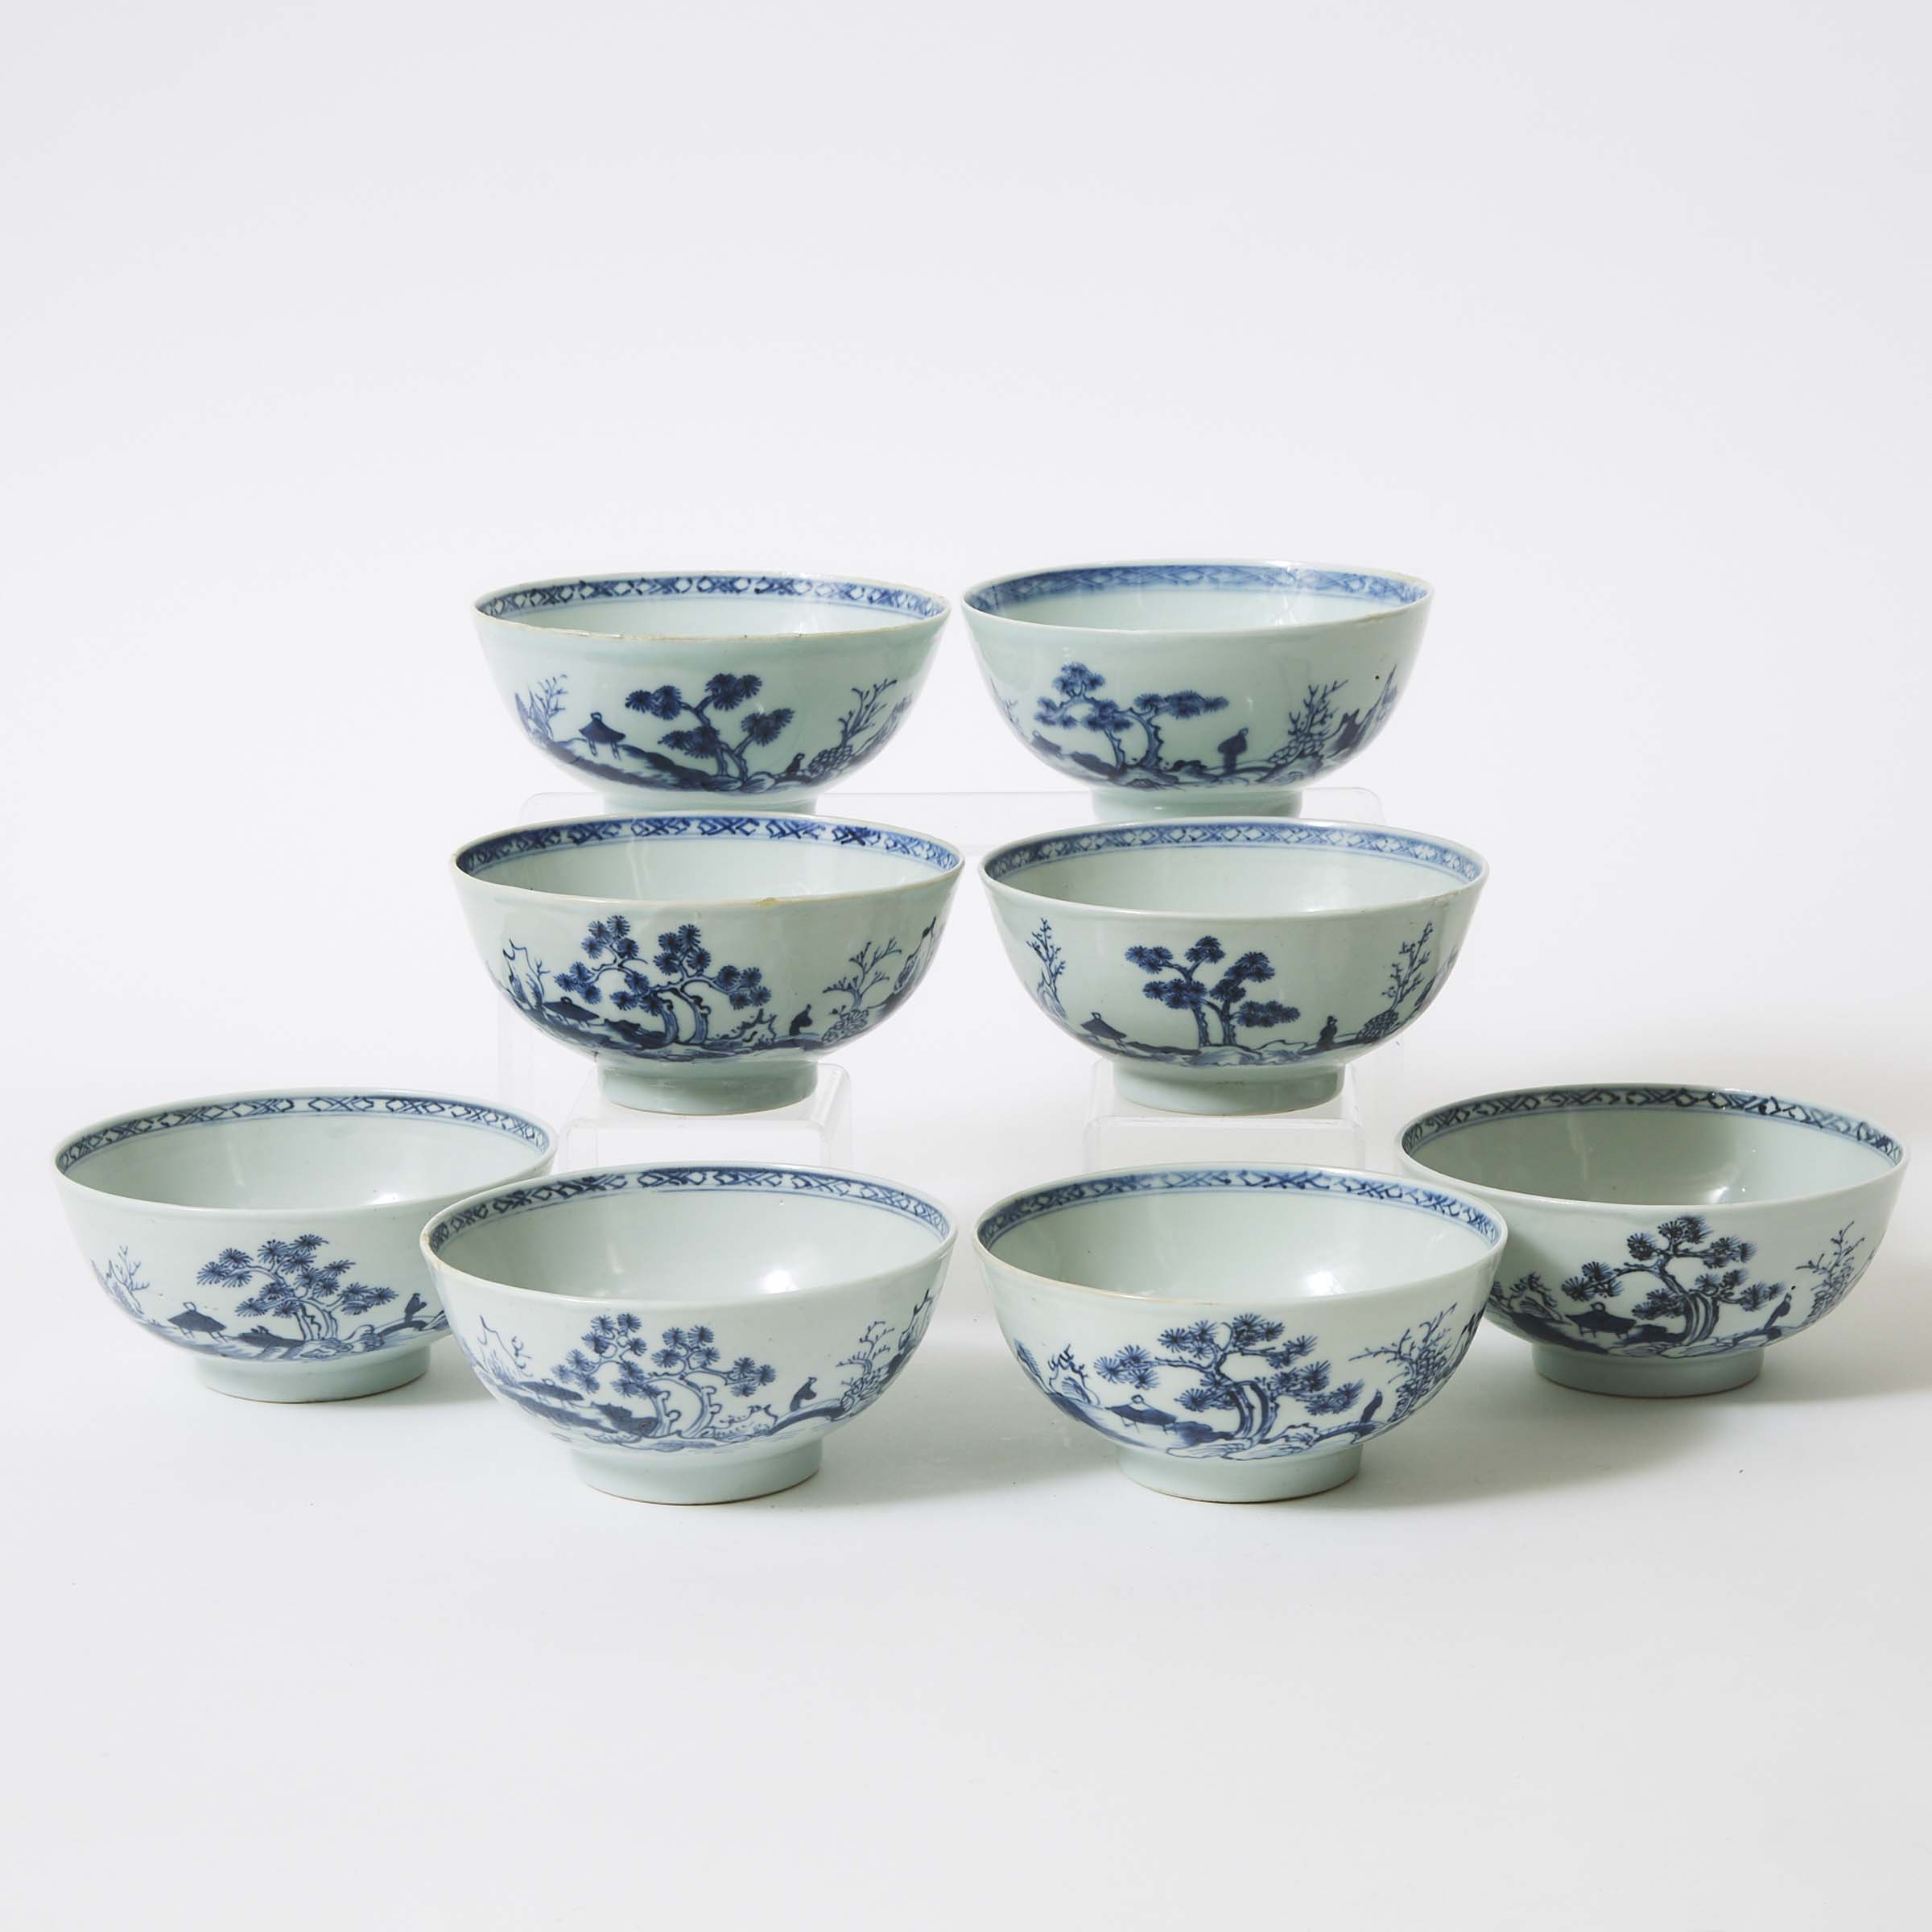 A Set of Eight 'Scholar on Bridge' Pattern Small Bowls from the Nanking Cargo, Qianlong Period, Circa 1750